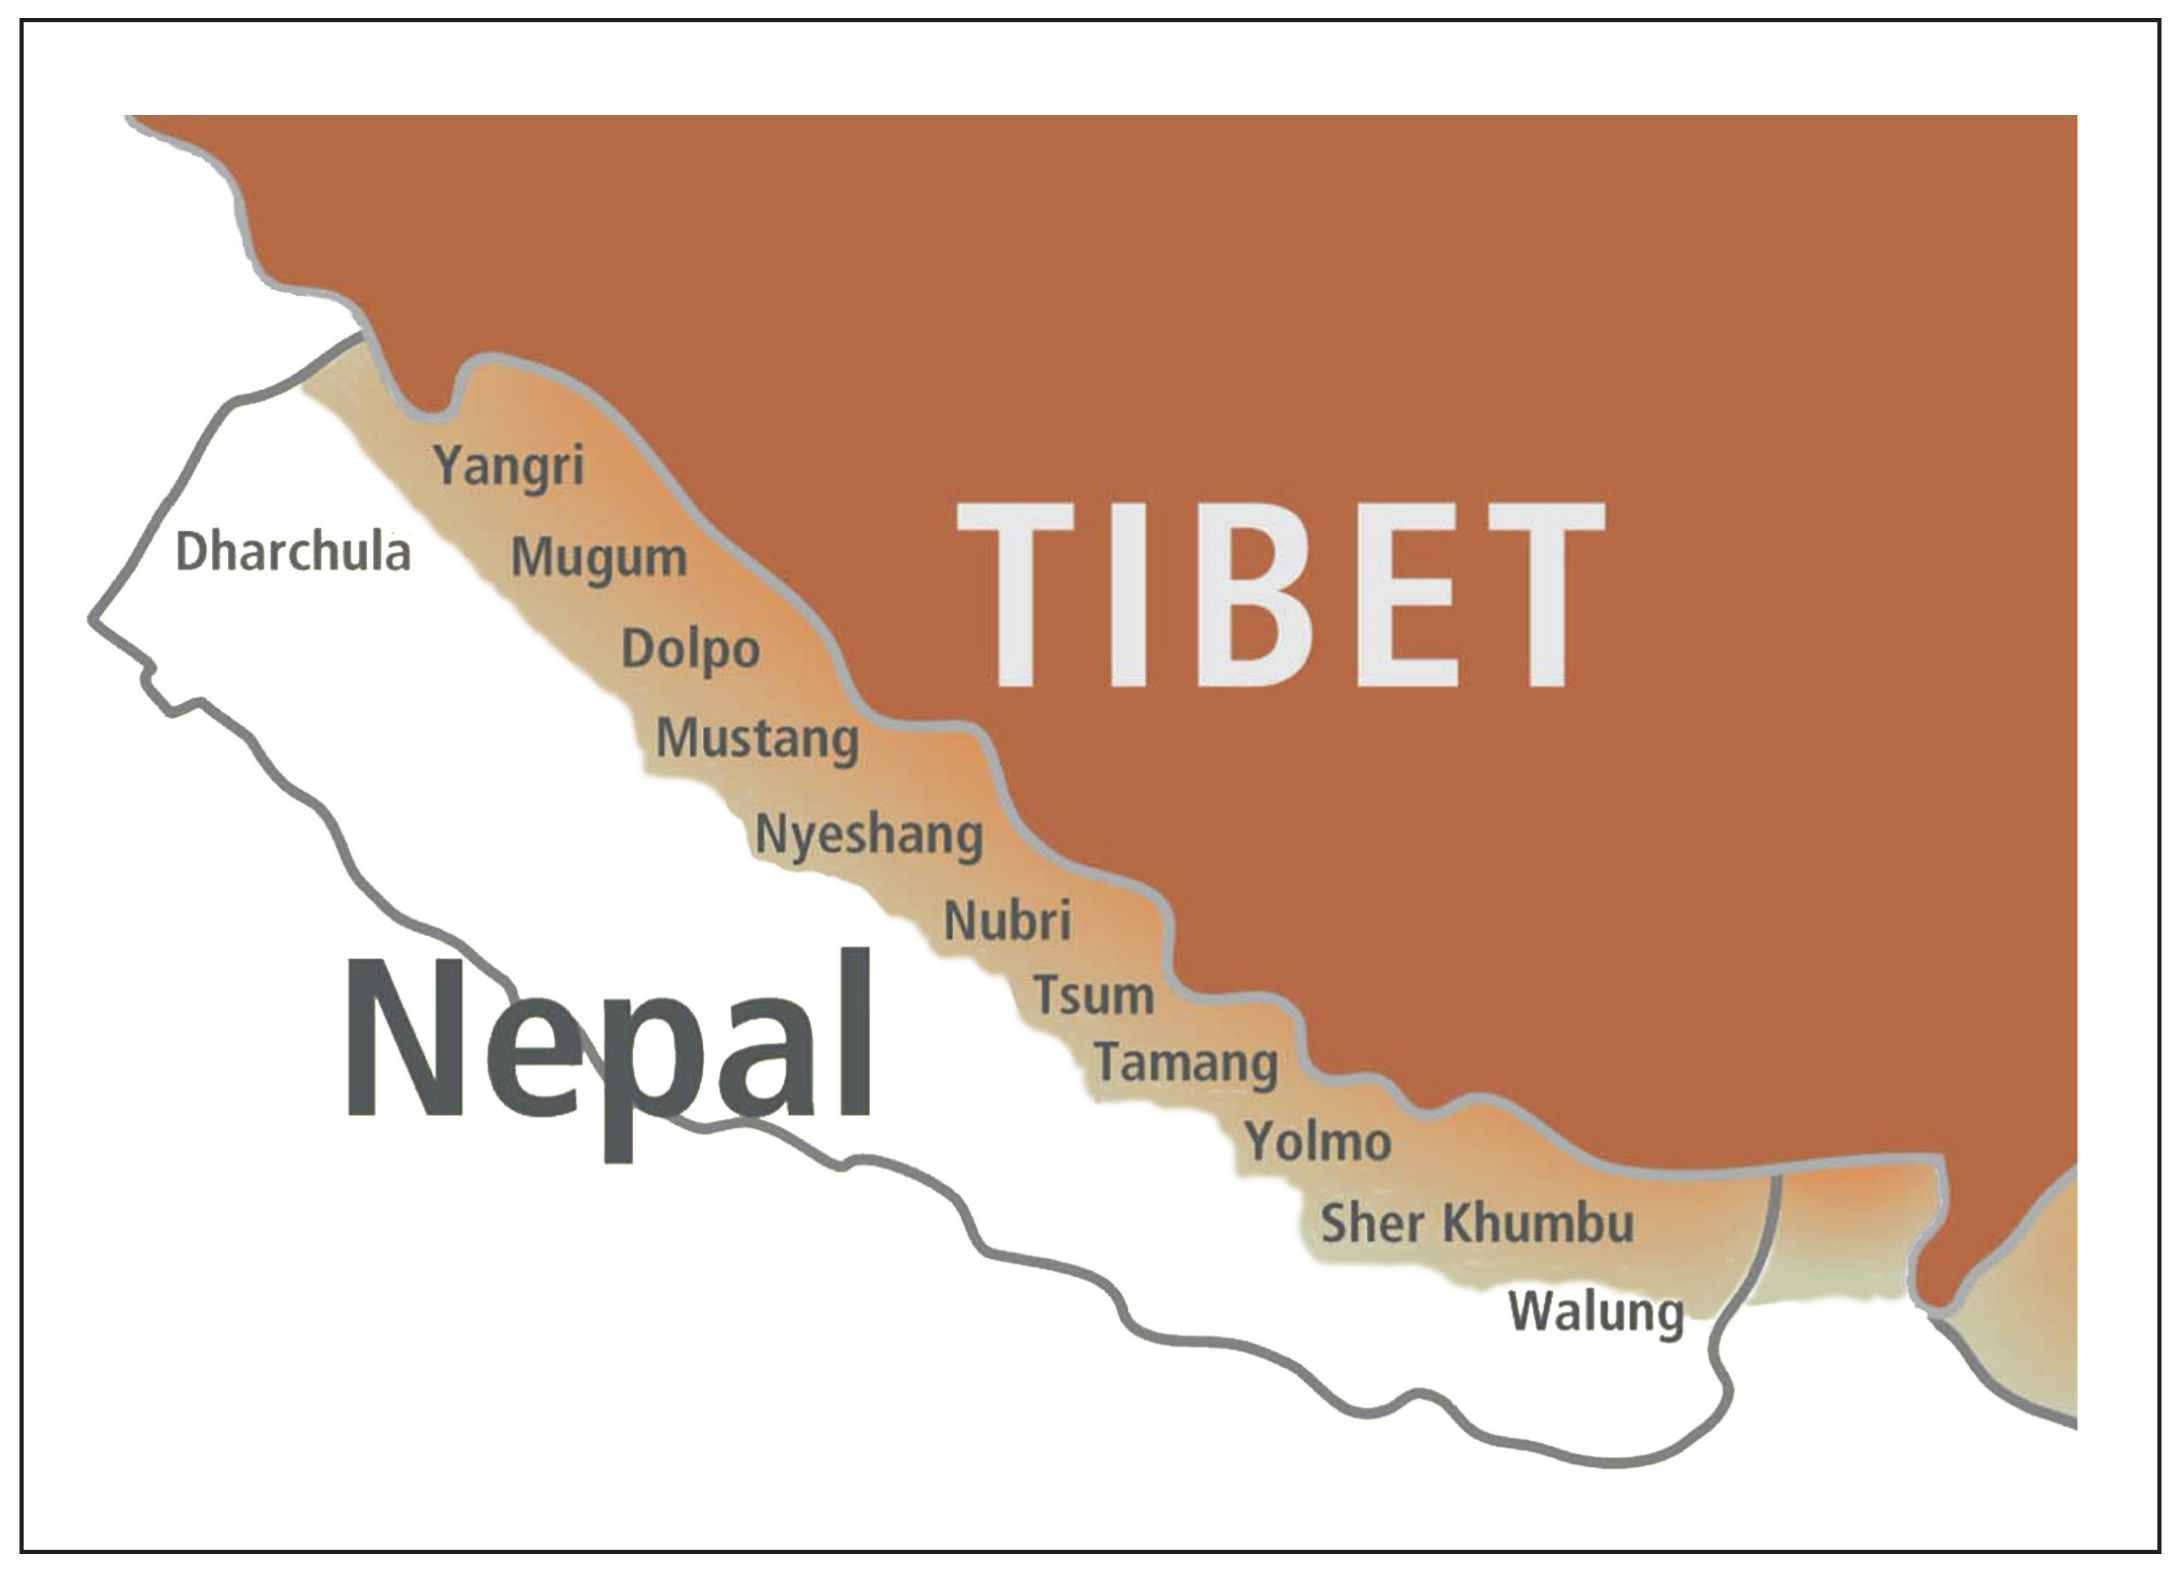 Ethnic Tibetan peoples and Tibetan Buddhist cultural areas in Nepal